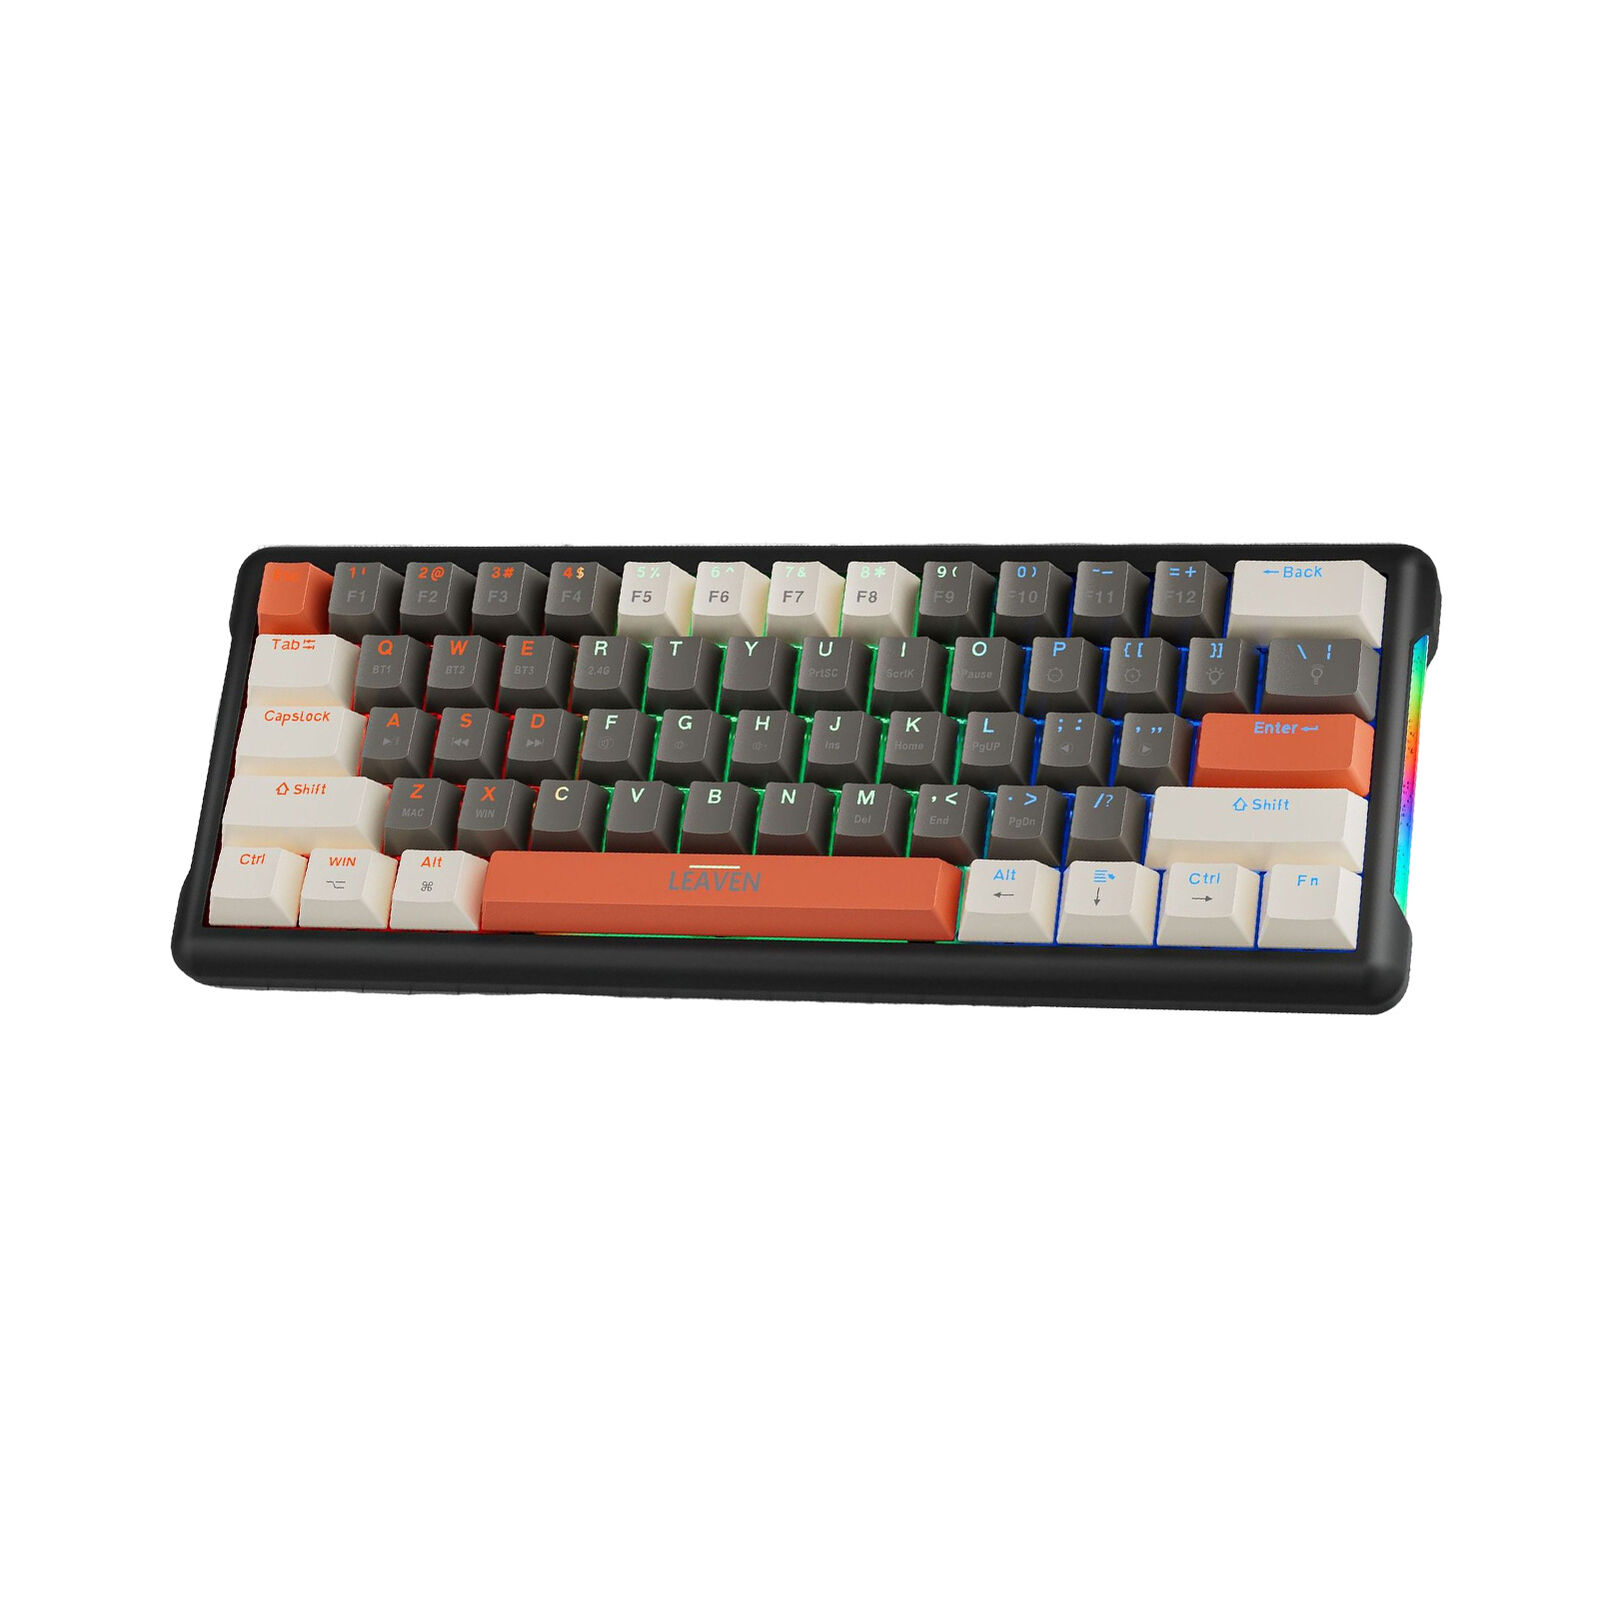 Russian Wired Mechanical Gaming Keyboard with Backlit Keys  mf